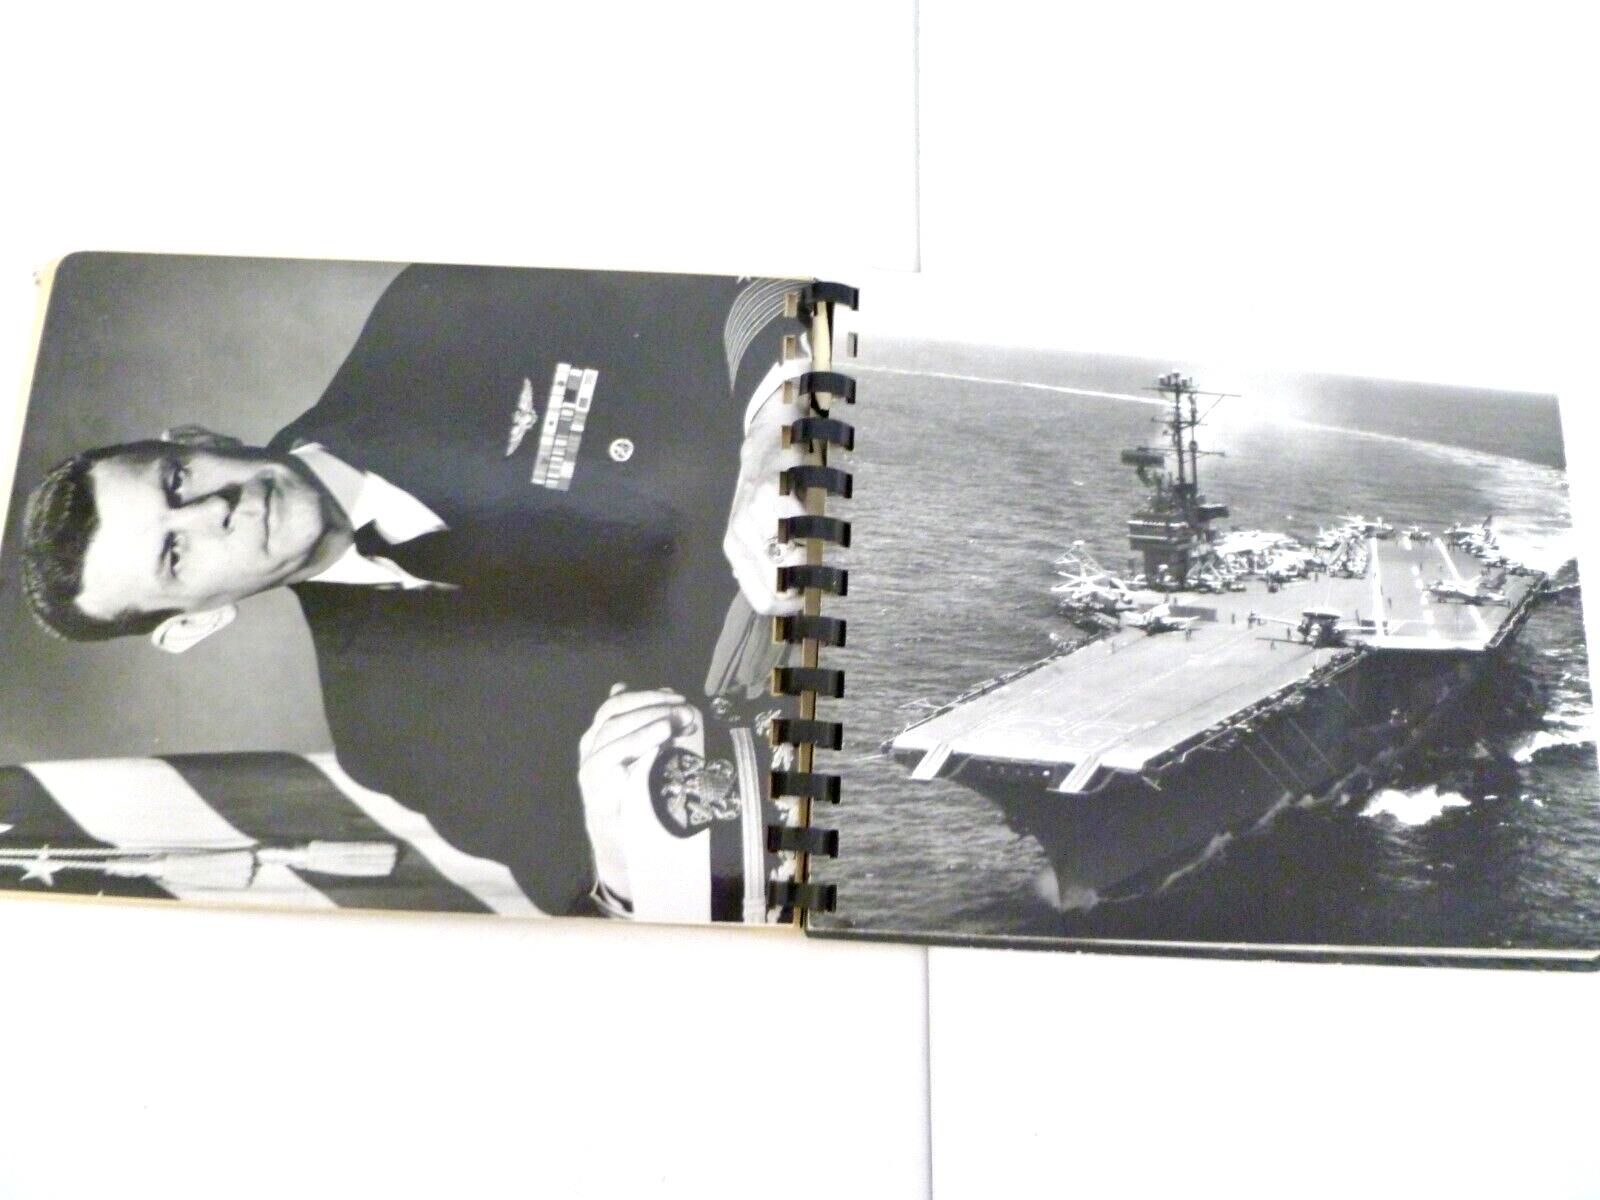 USN US NAVY SIGNED USS FORRESTAL CVA-59 SHIP MILITARY AIRCRAFT CARRIER BOOKLET